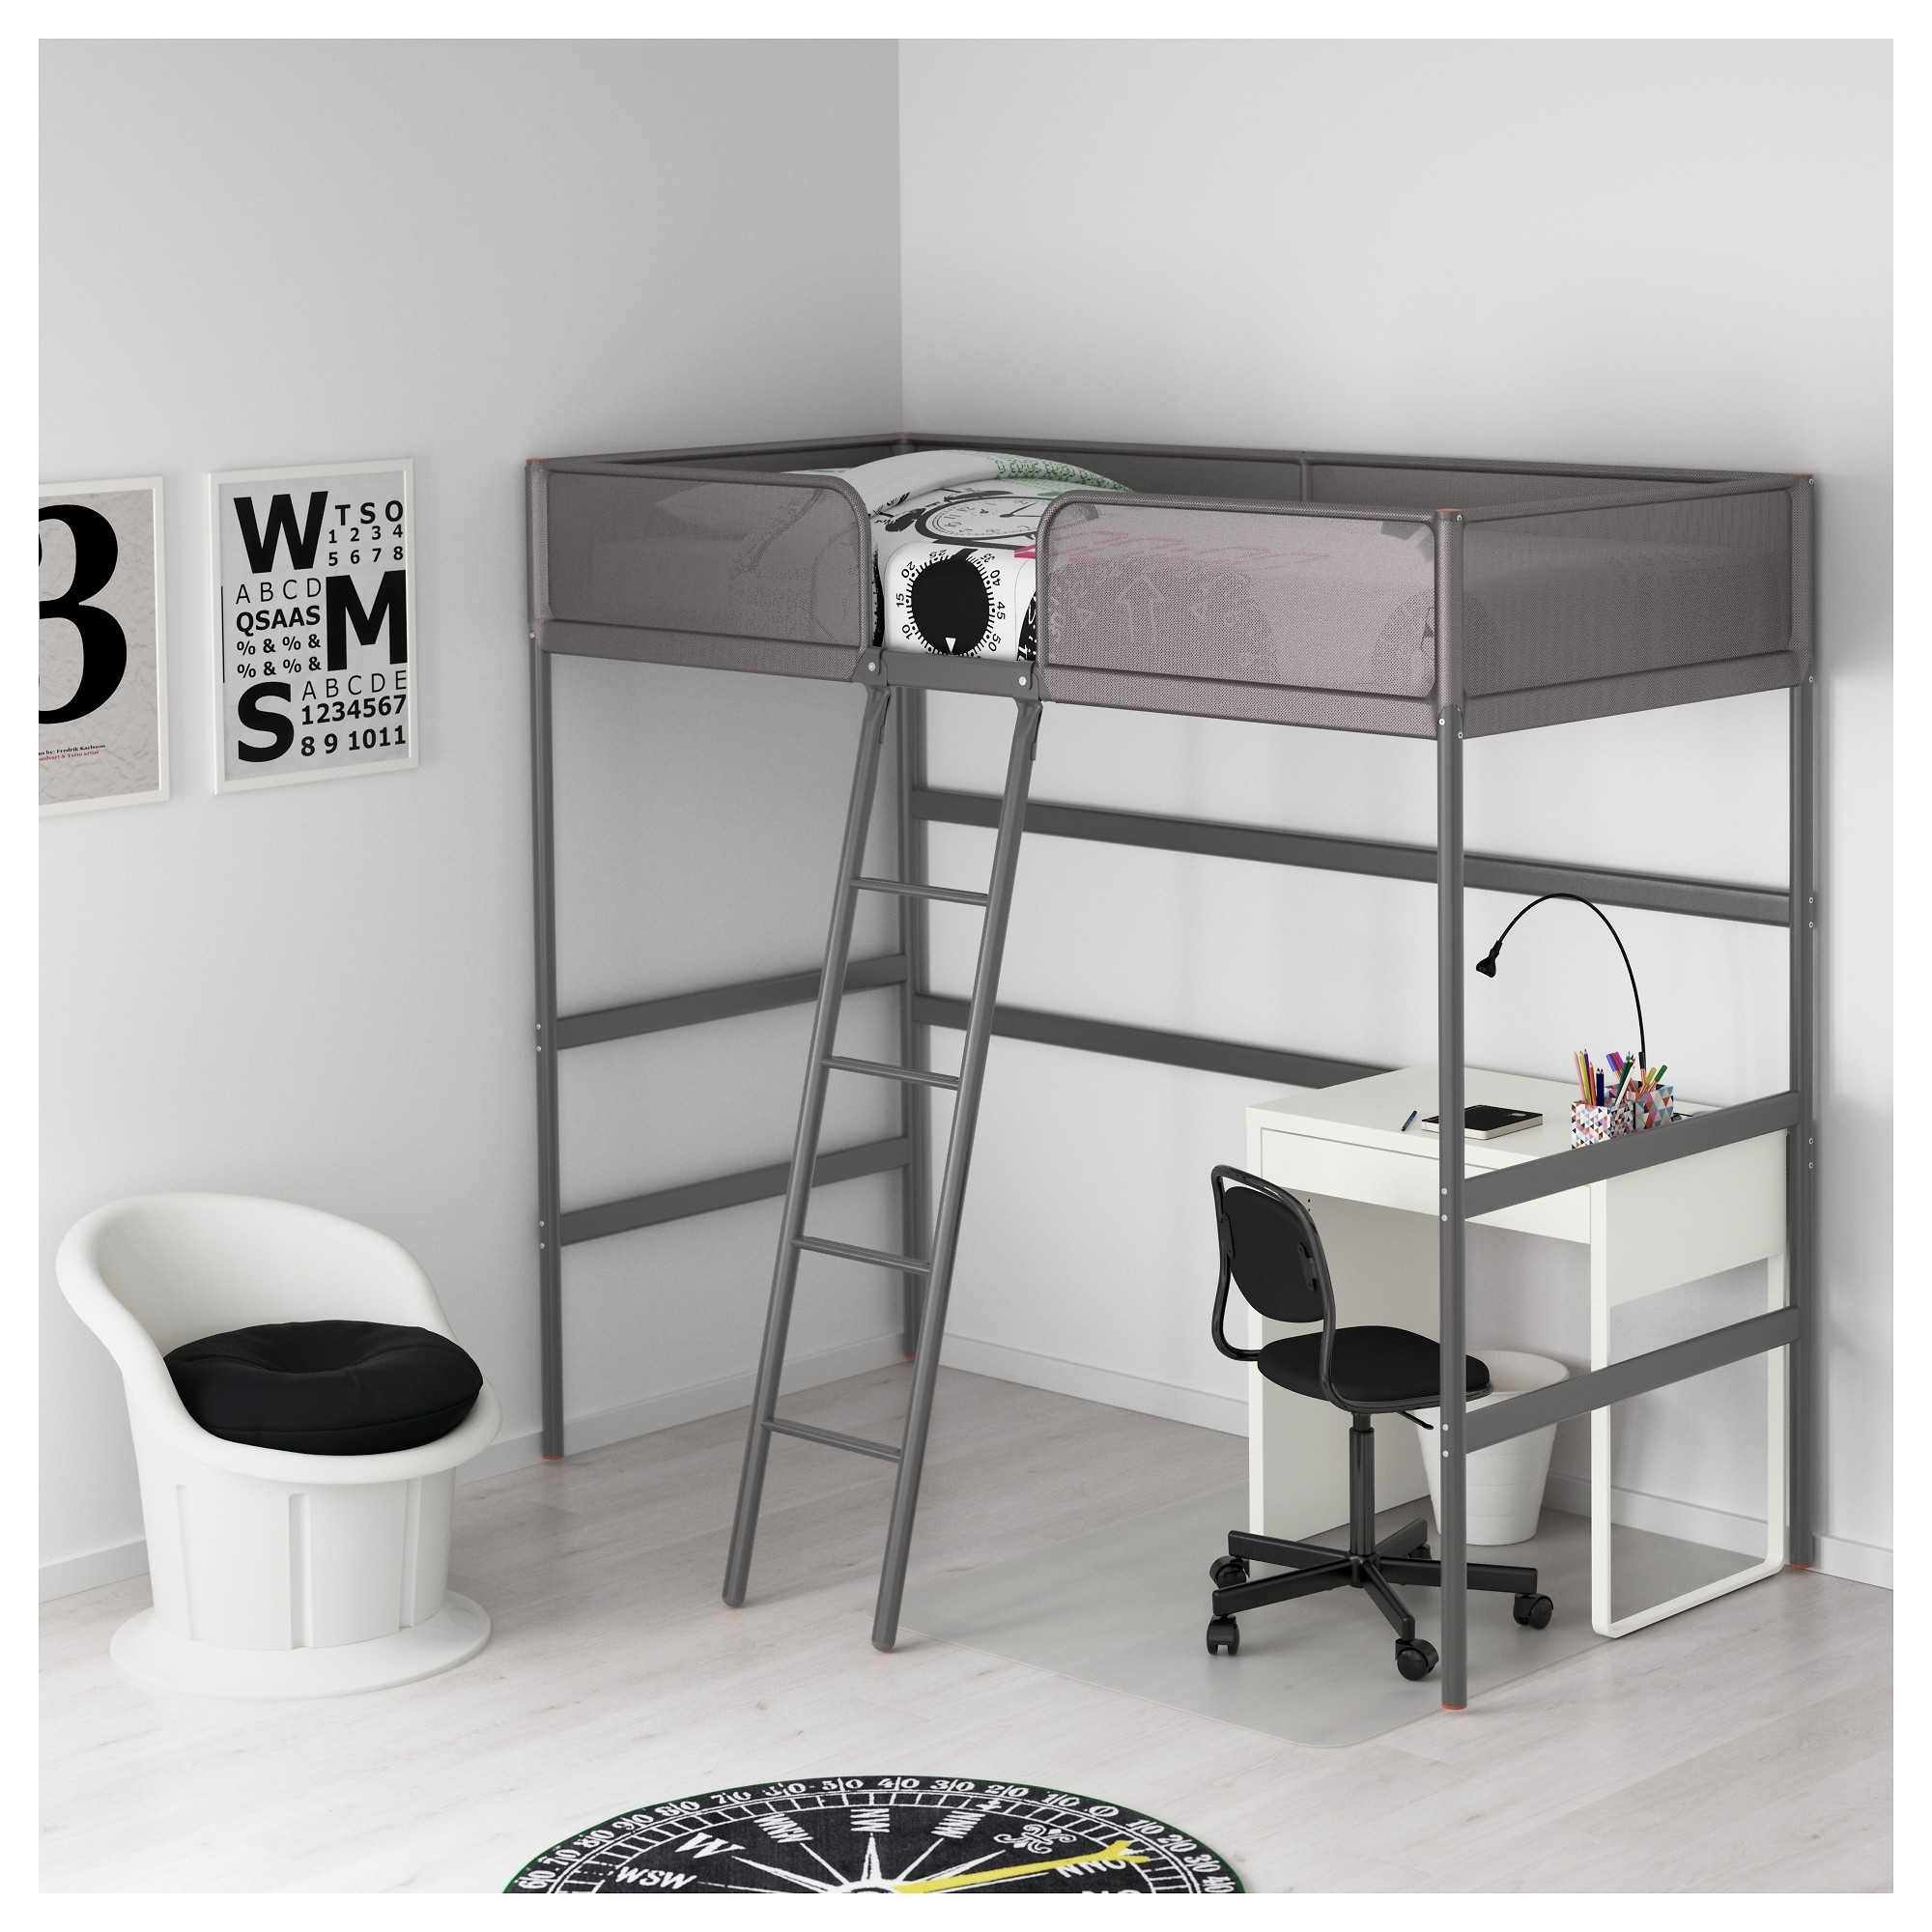 Ikea Loft Beds To Or Not In, Ikea Tuffing Bunk Bed